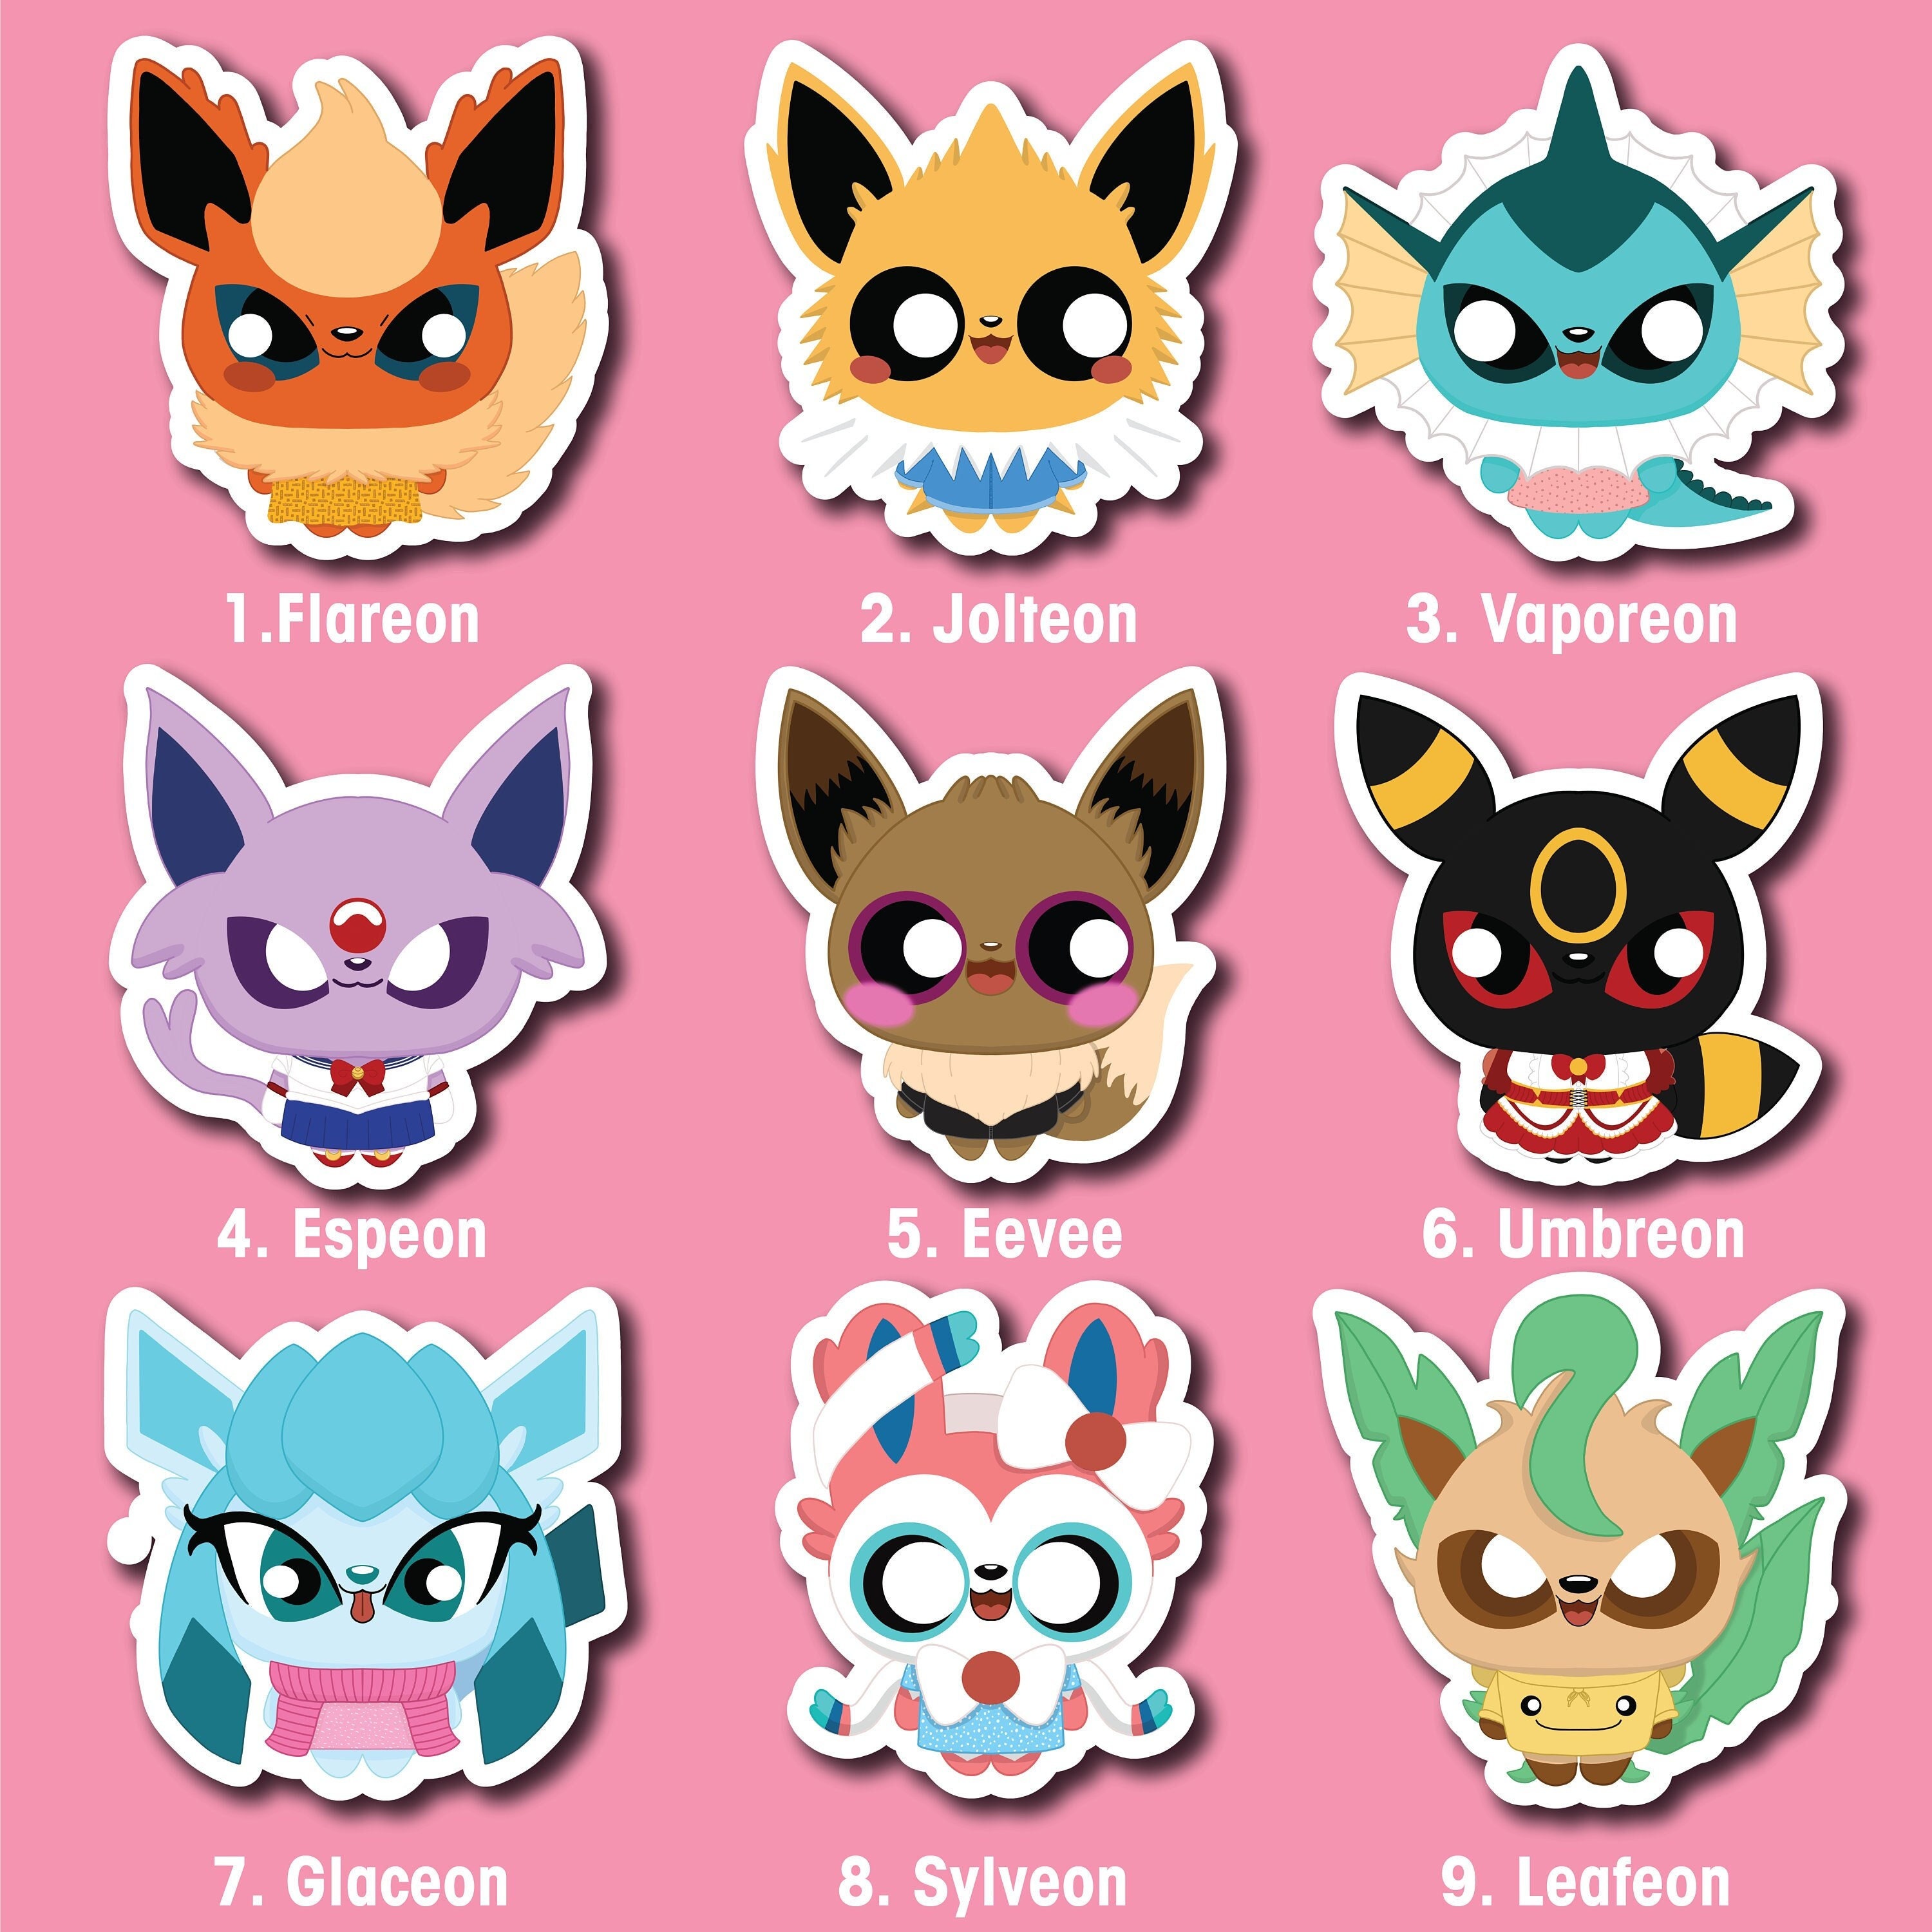 Cute and Kawaii Eeveelution Pokemon Stickers for Boys and Girls of All Ages